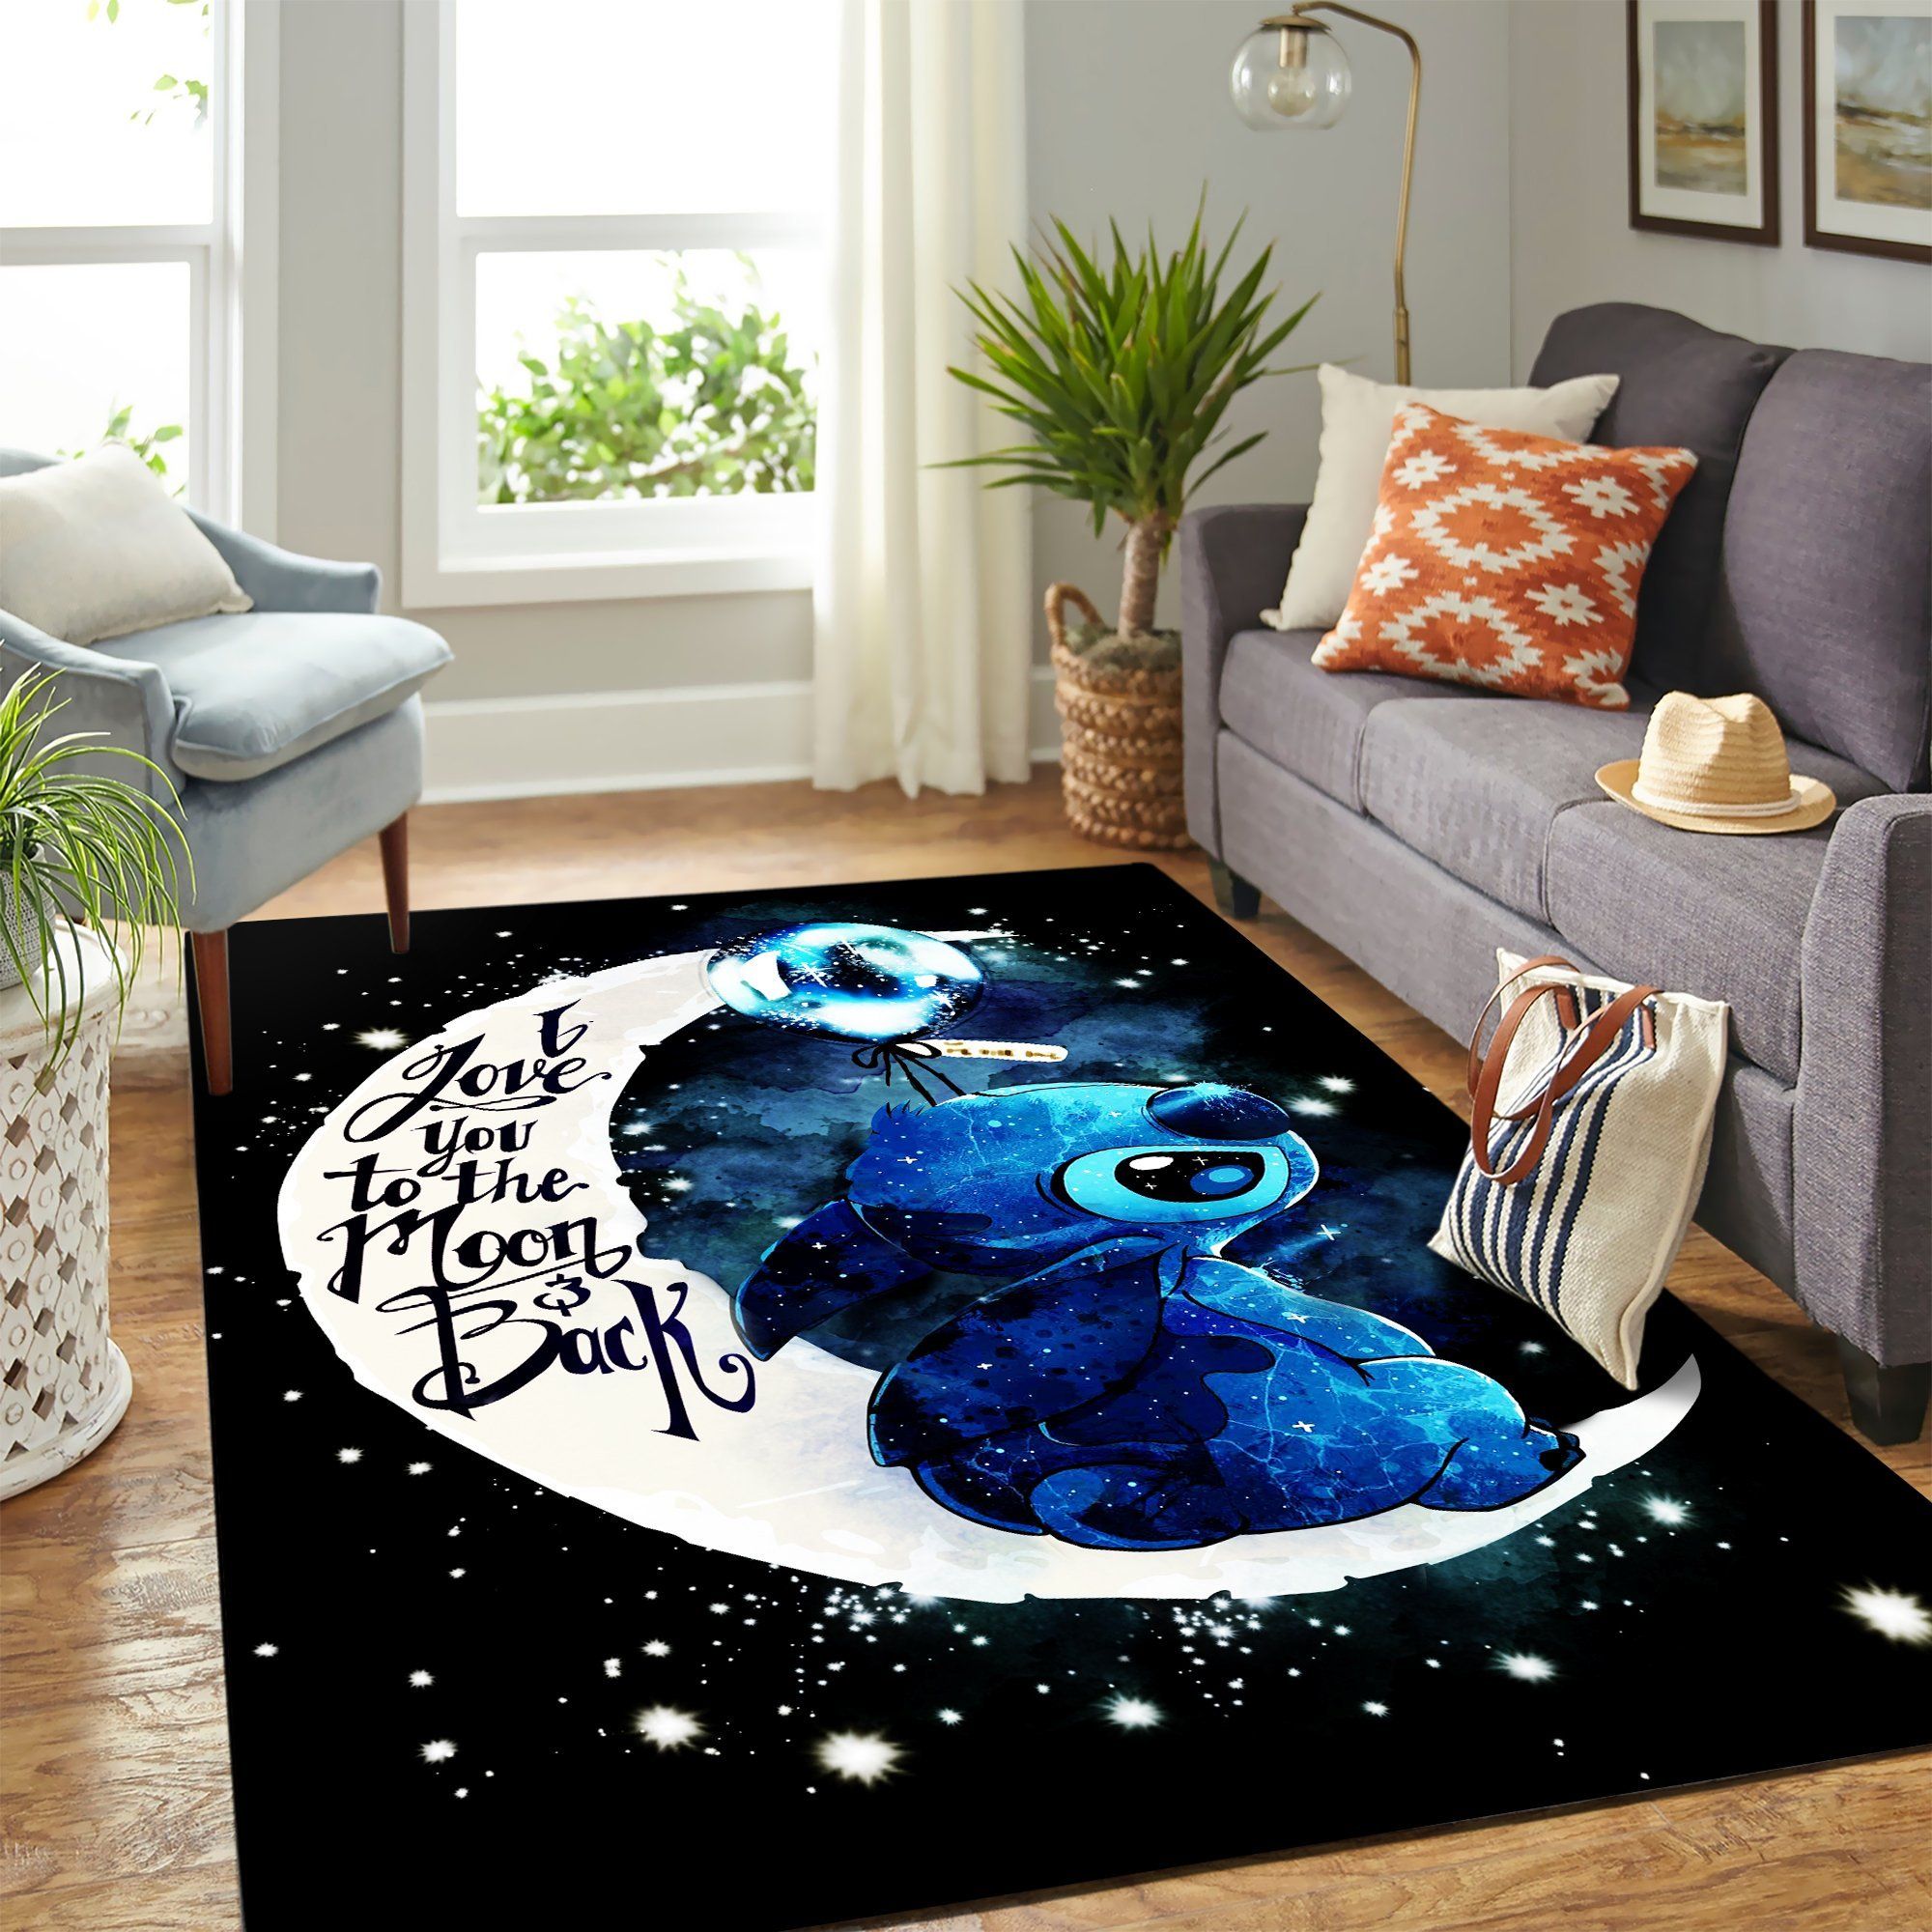 Stitch Moon And Back Cute Carpet Floor Area Rug - Bedroom Living Room Decor Home Decor - Indoor Outdoor Rugs 1